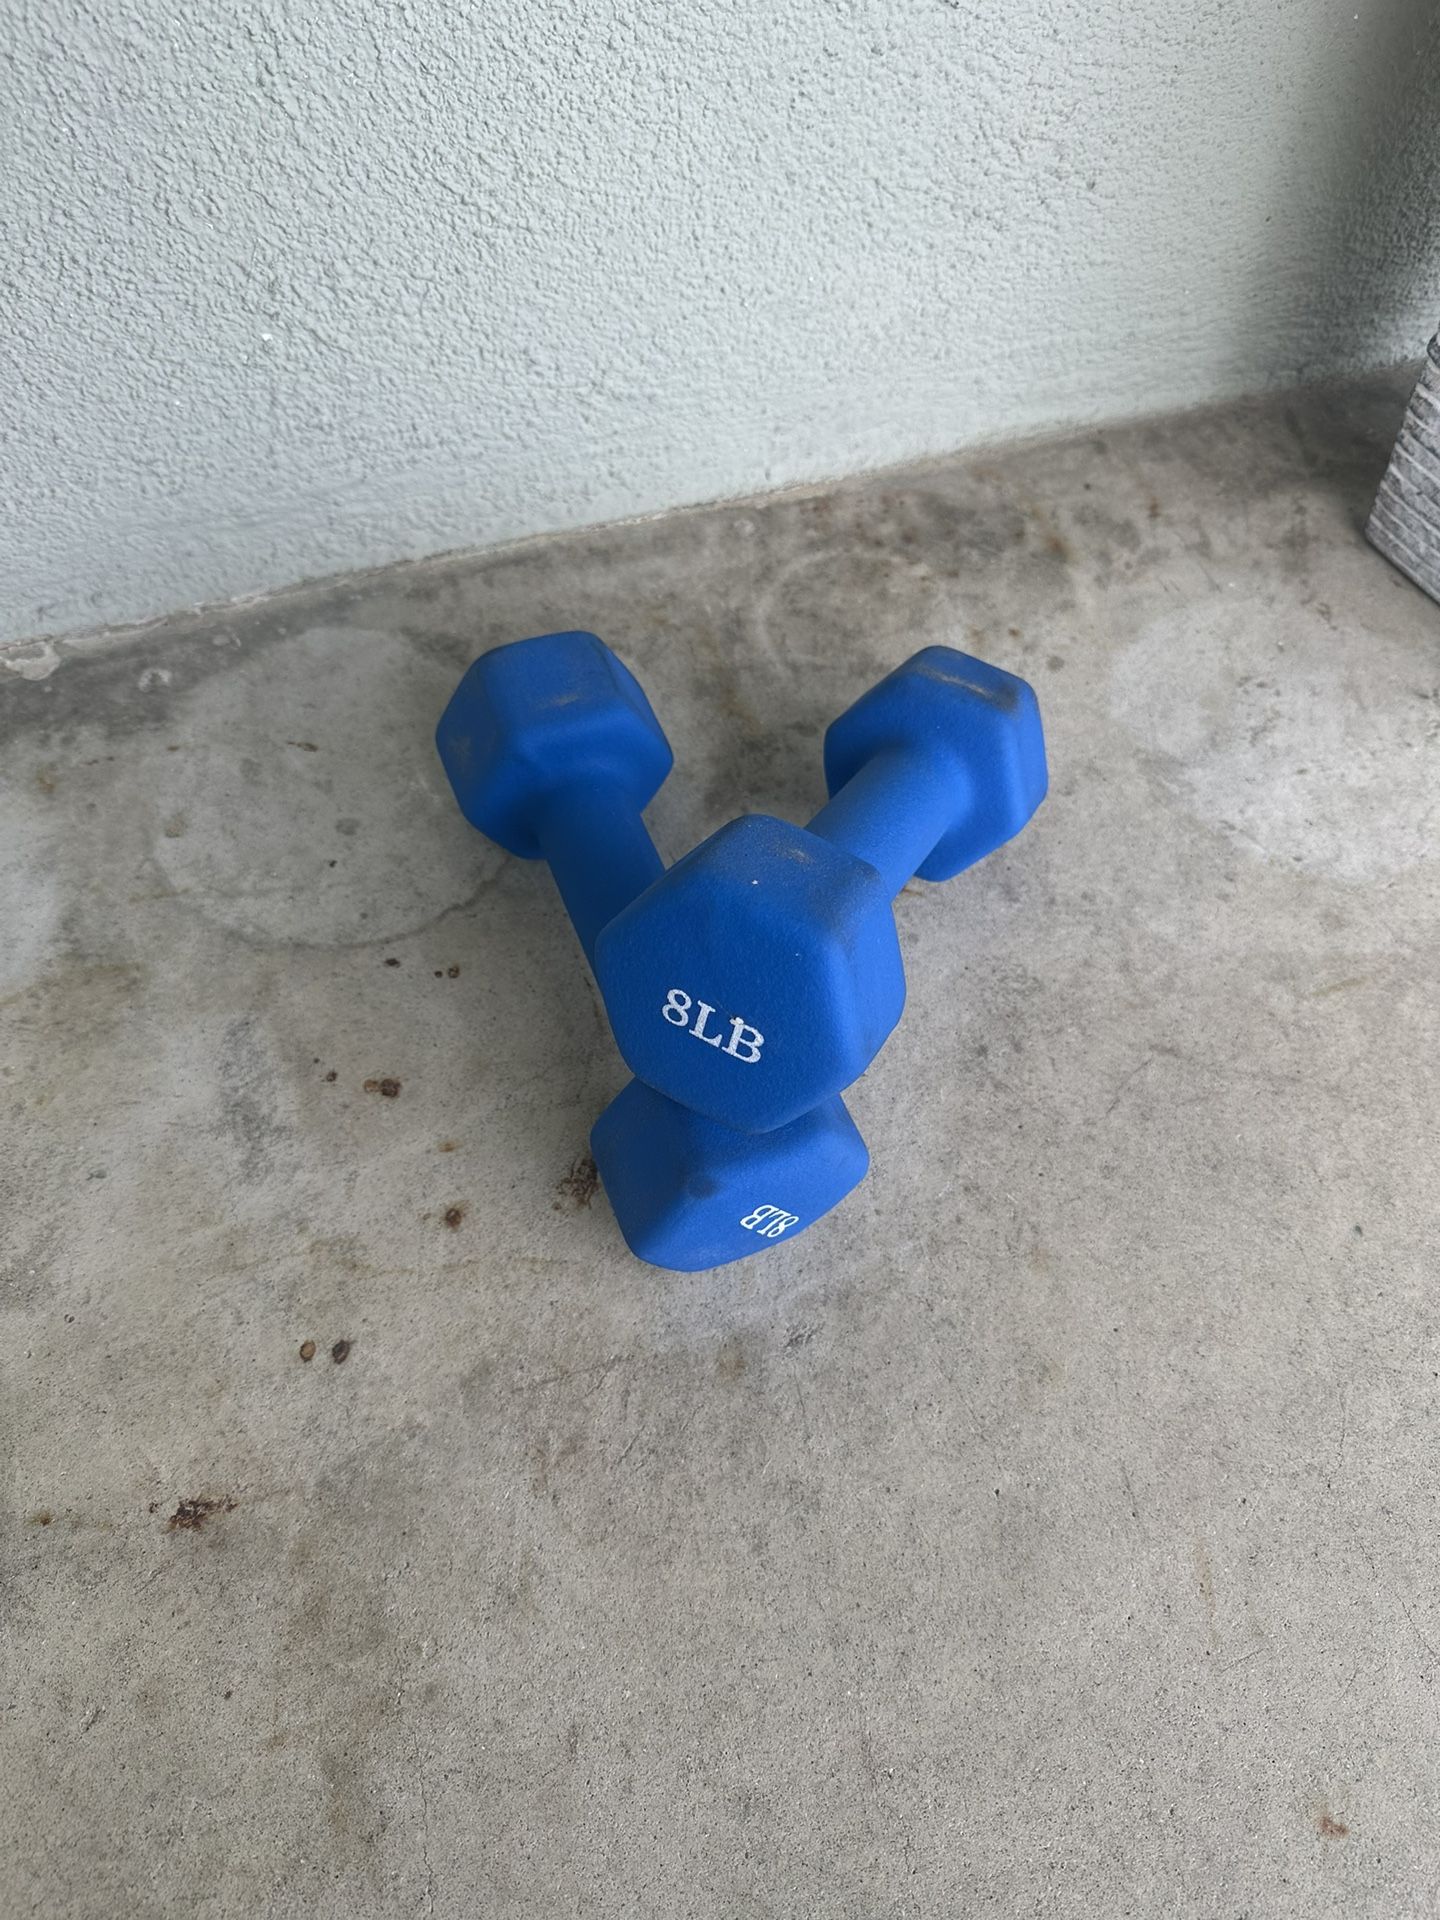 8 LB Dumbbell Weights